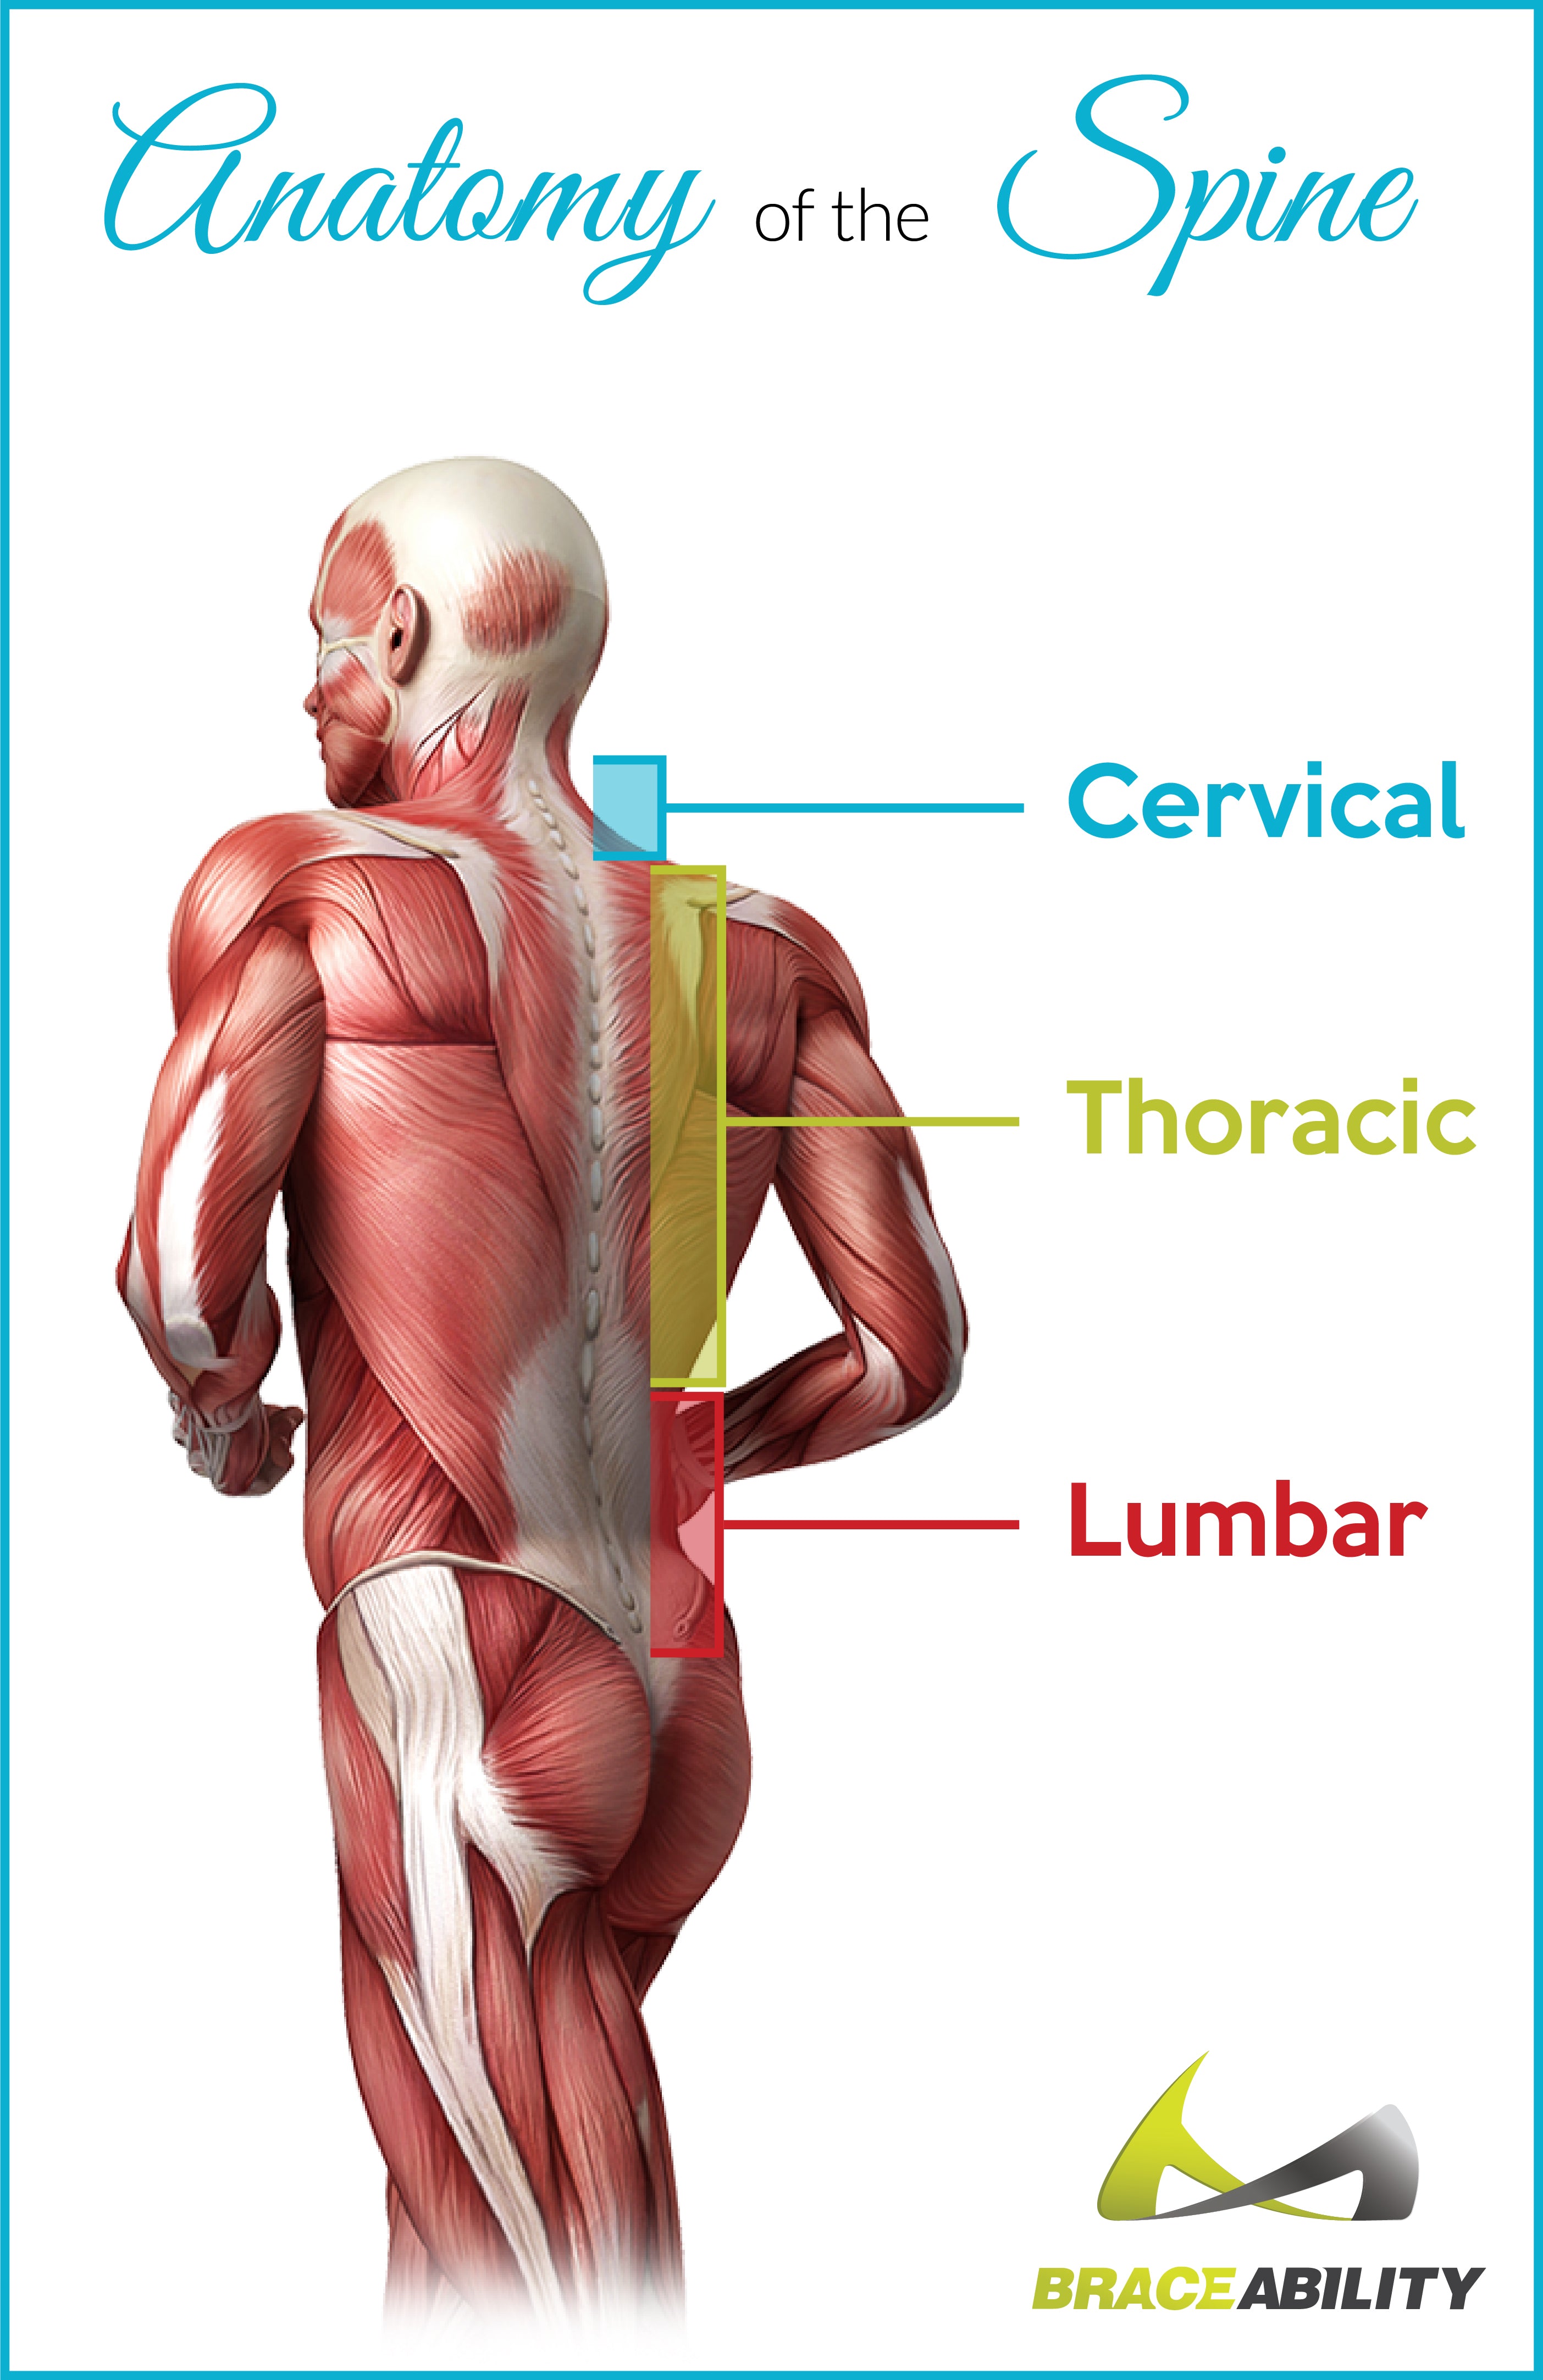 Location of thoracic spine injuries in the middle of your back